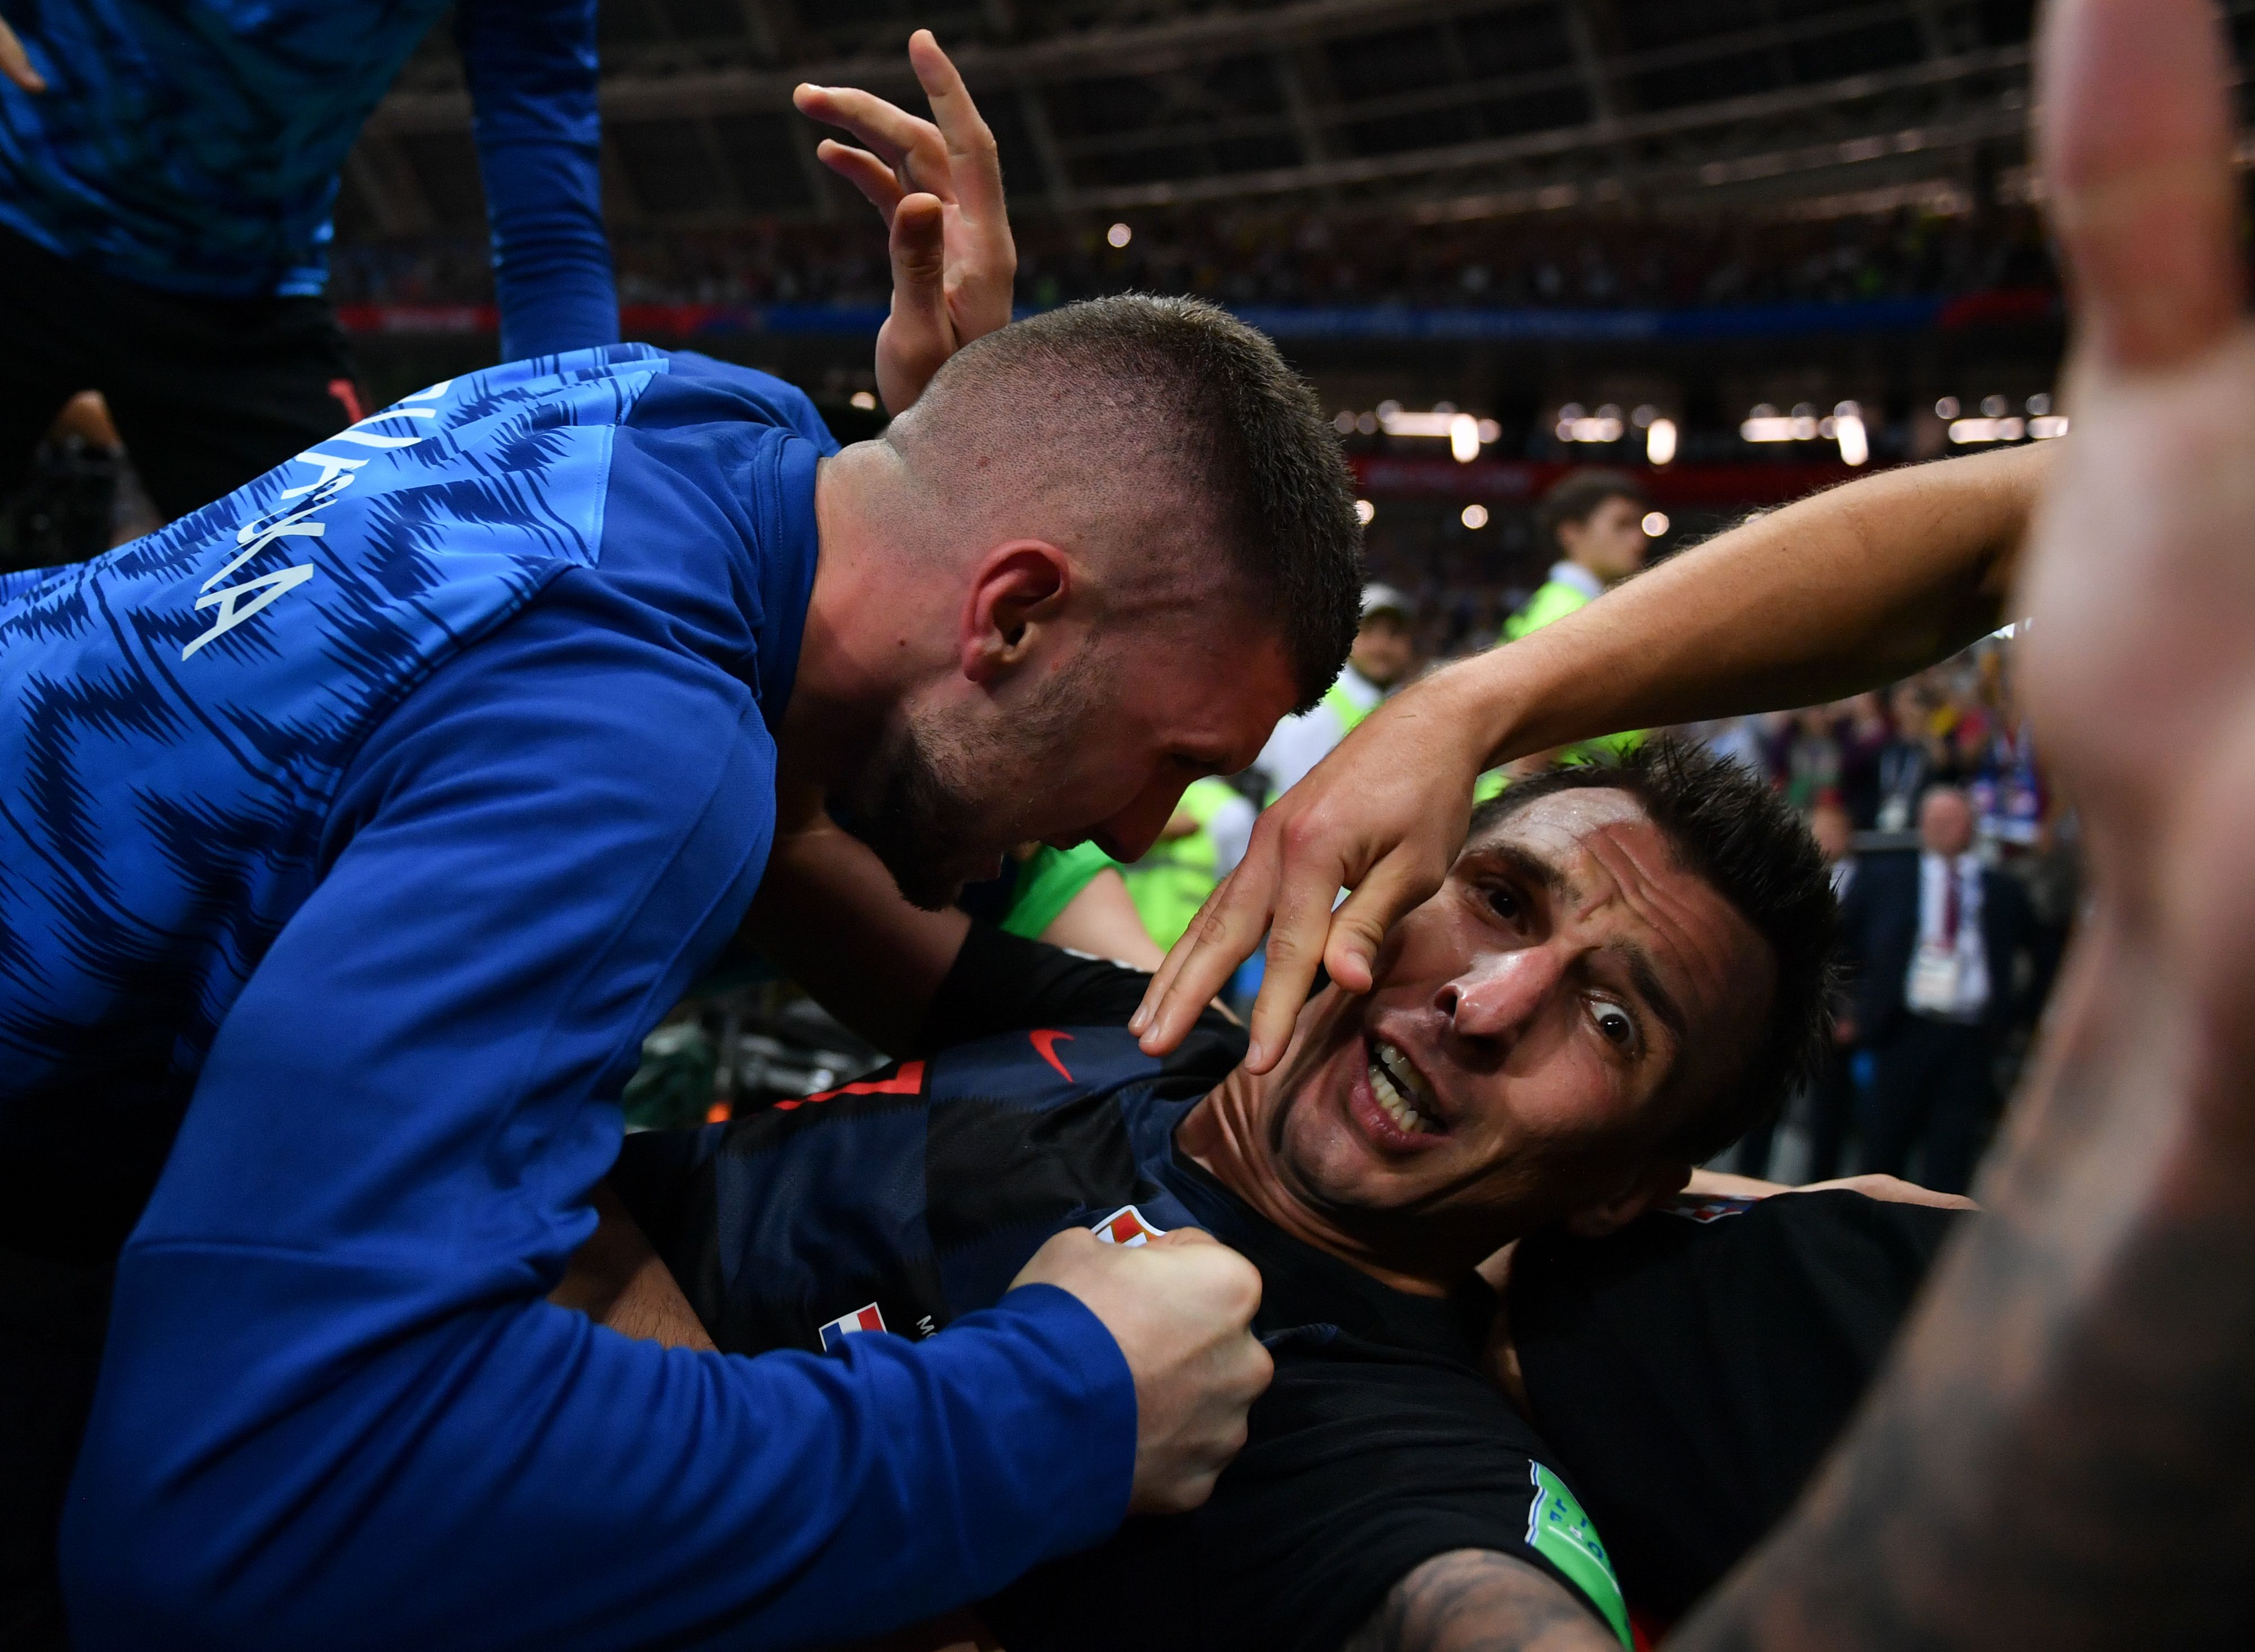 TOPSHOT - Croatia's forward Mario Mandzukic (C) celebrates with teammates after scoring his team's second goal during the Russia 2018 World Cup semi-final football match between Croatia and England at the Luzhniki Stadium in Moscow on July 11, 2018.